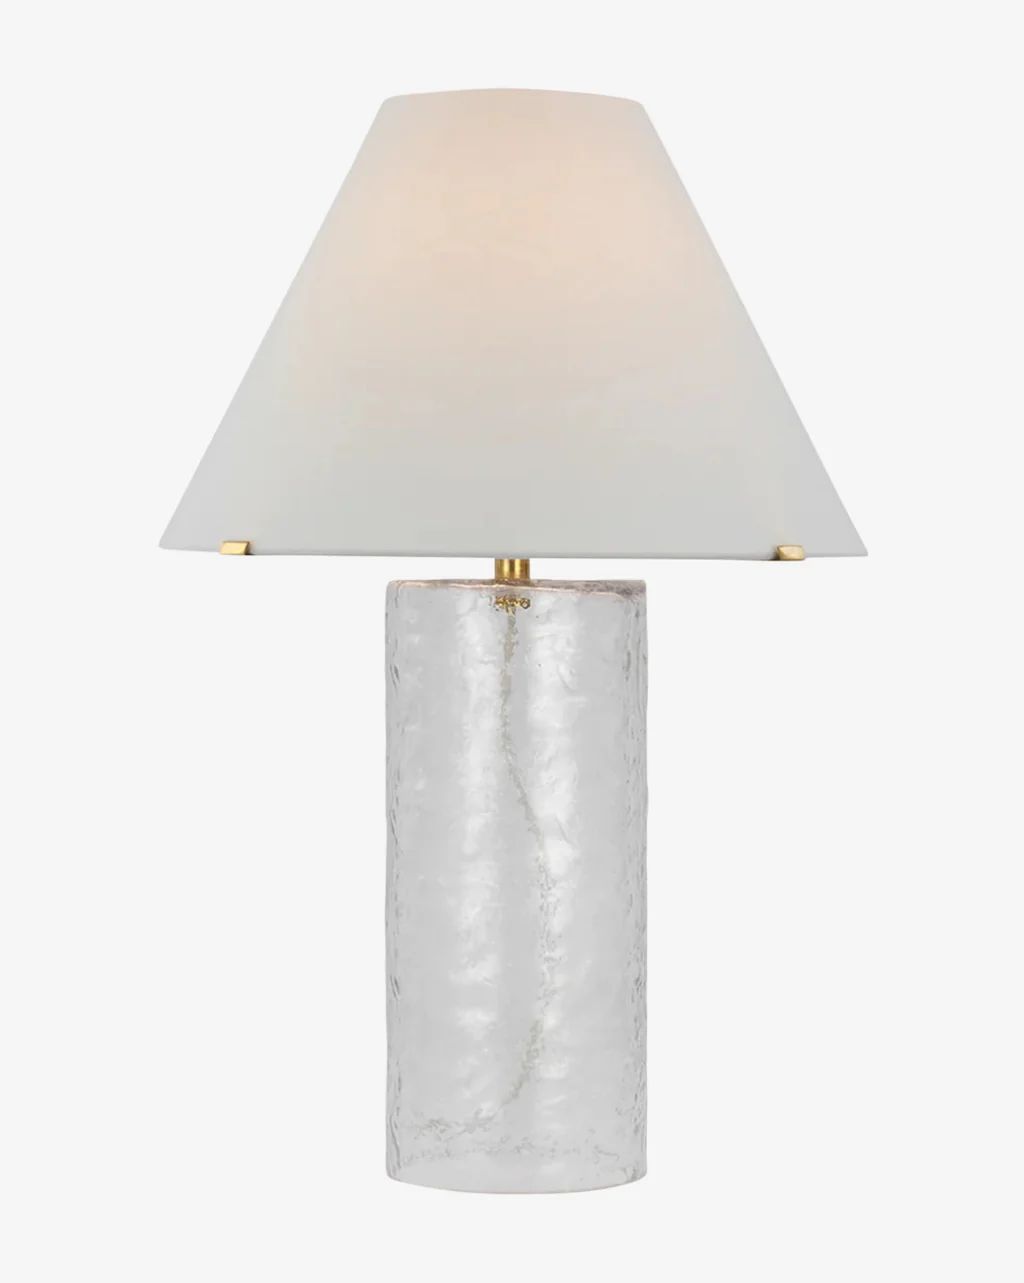 Driscoll Table Lamp | McGee & Co.